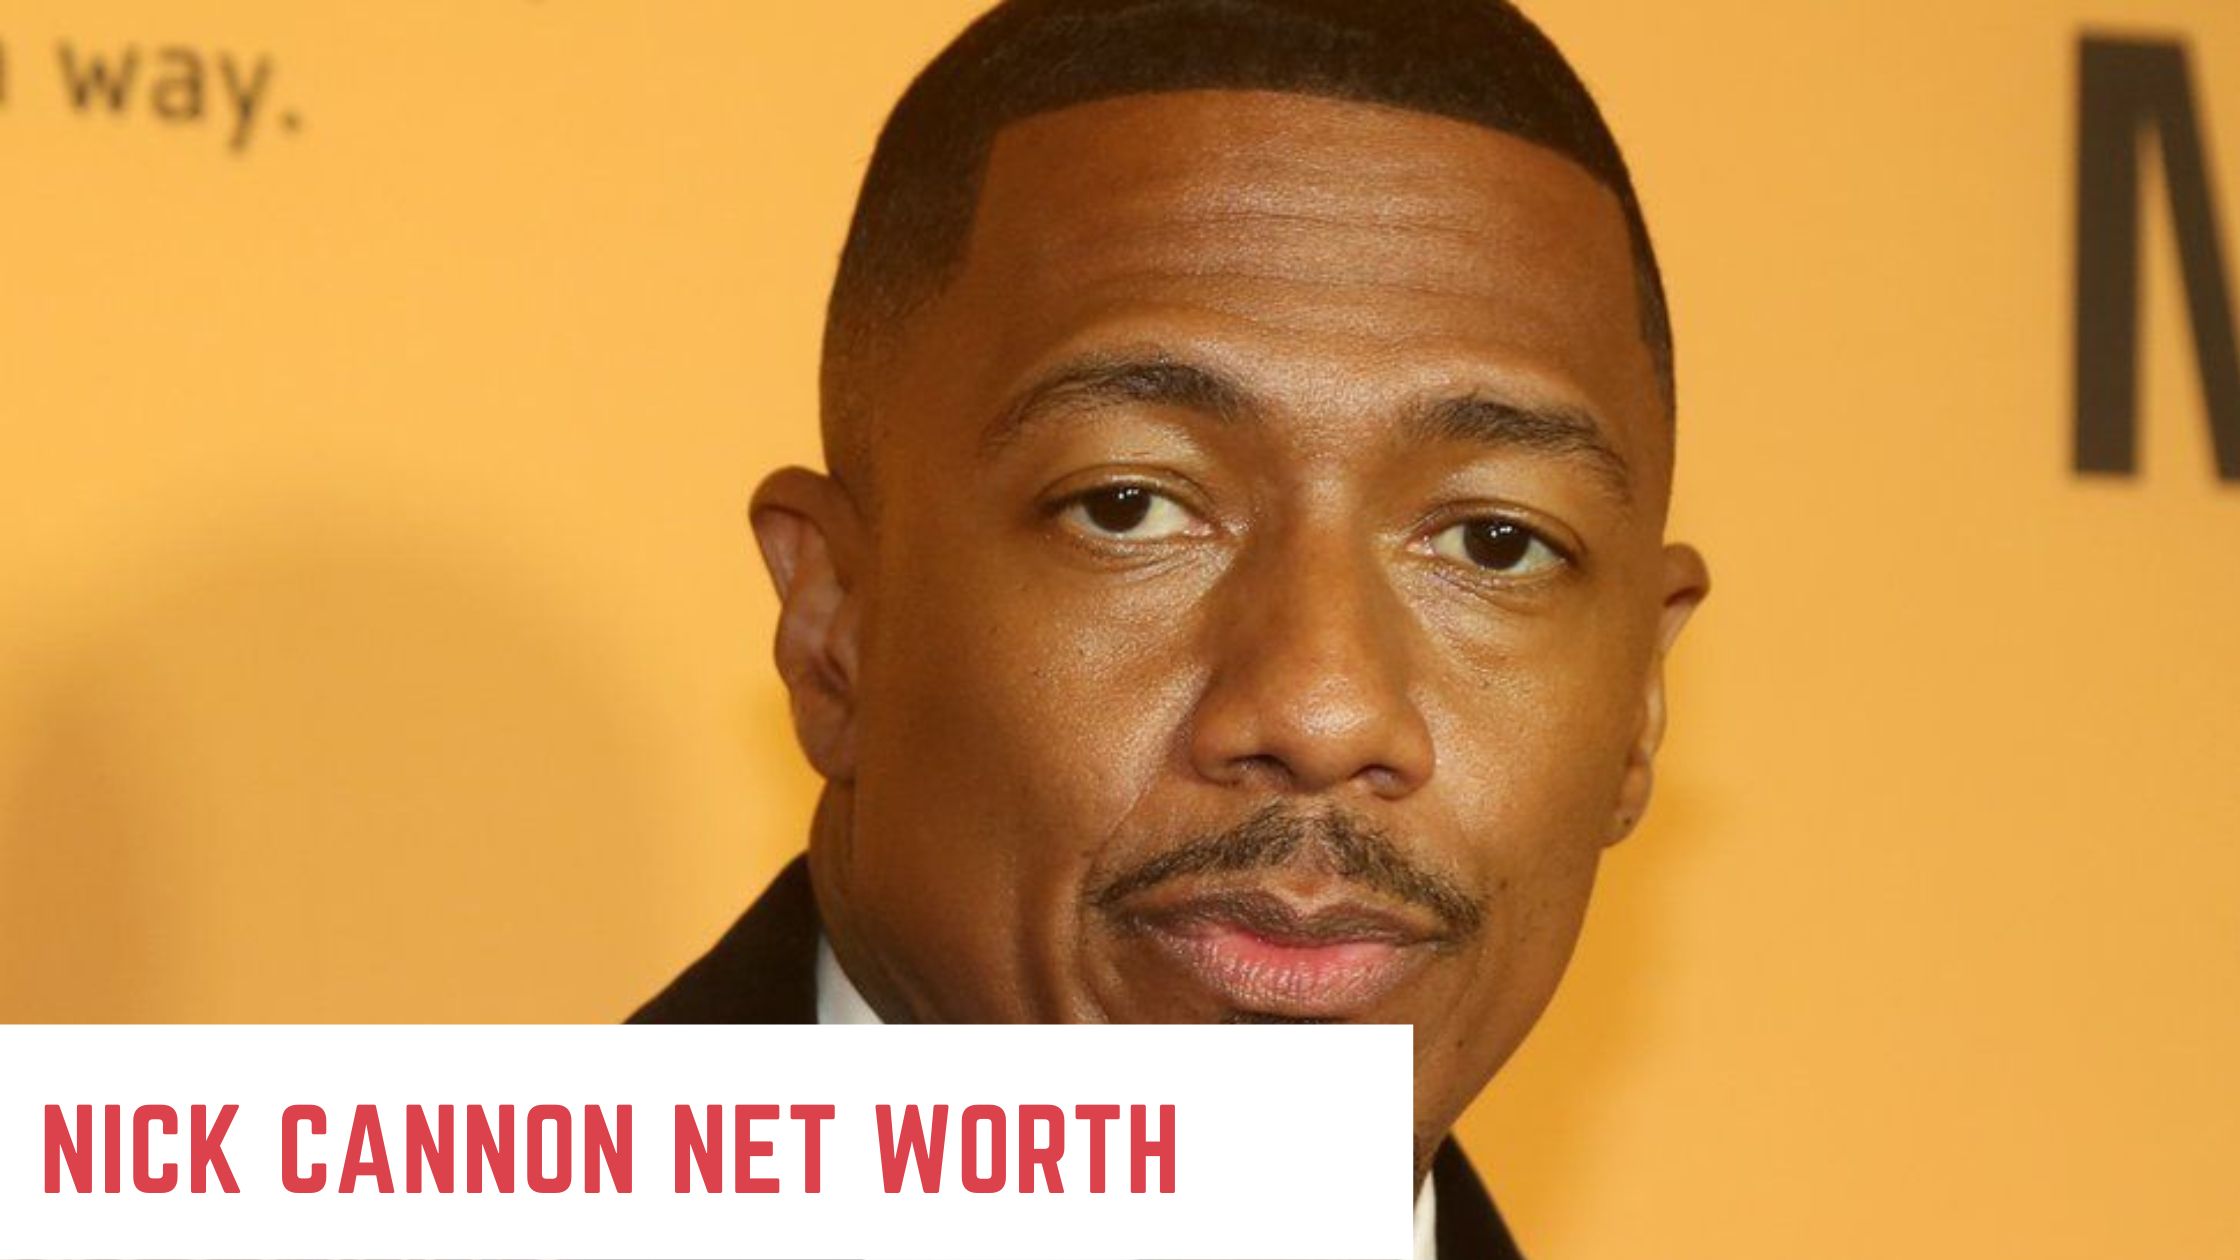 America’s Favorite TV Host Nick Cannon: Net Worth, Biography, Family, Career, Early Life, And More